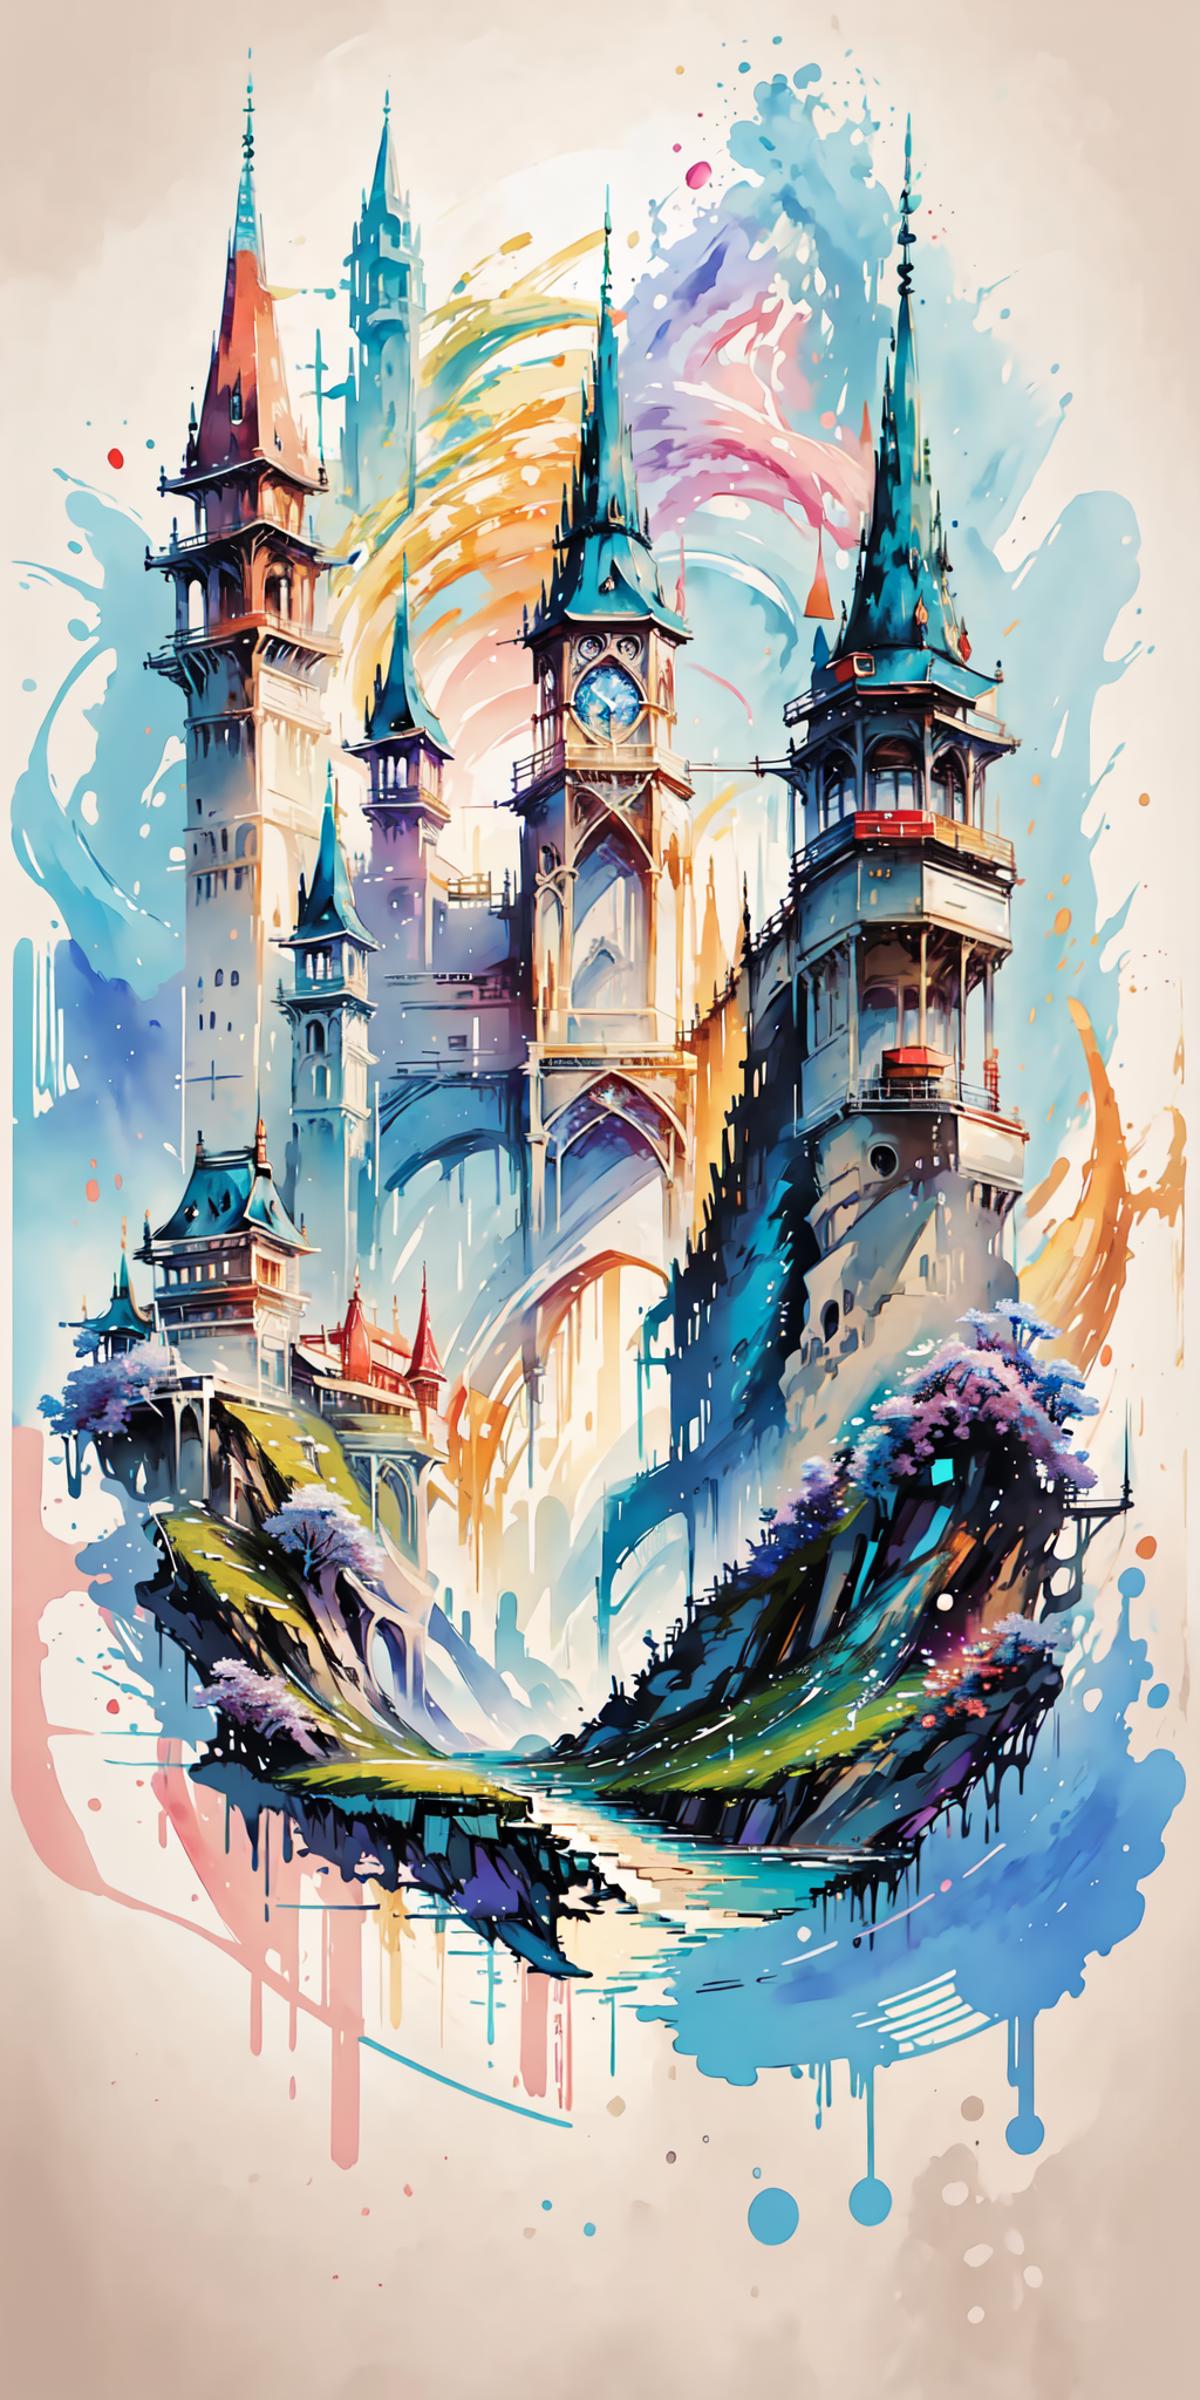 A colorful painting of a castle with a clock tower and a dragon.